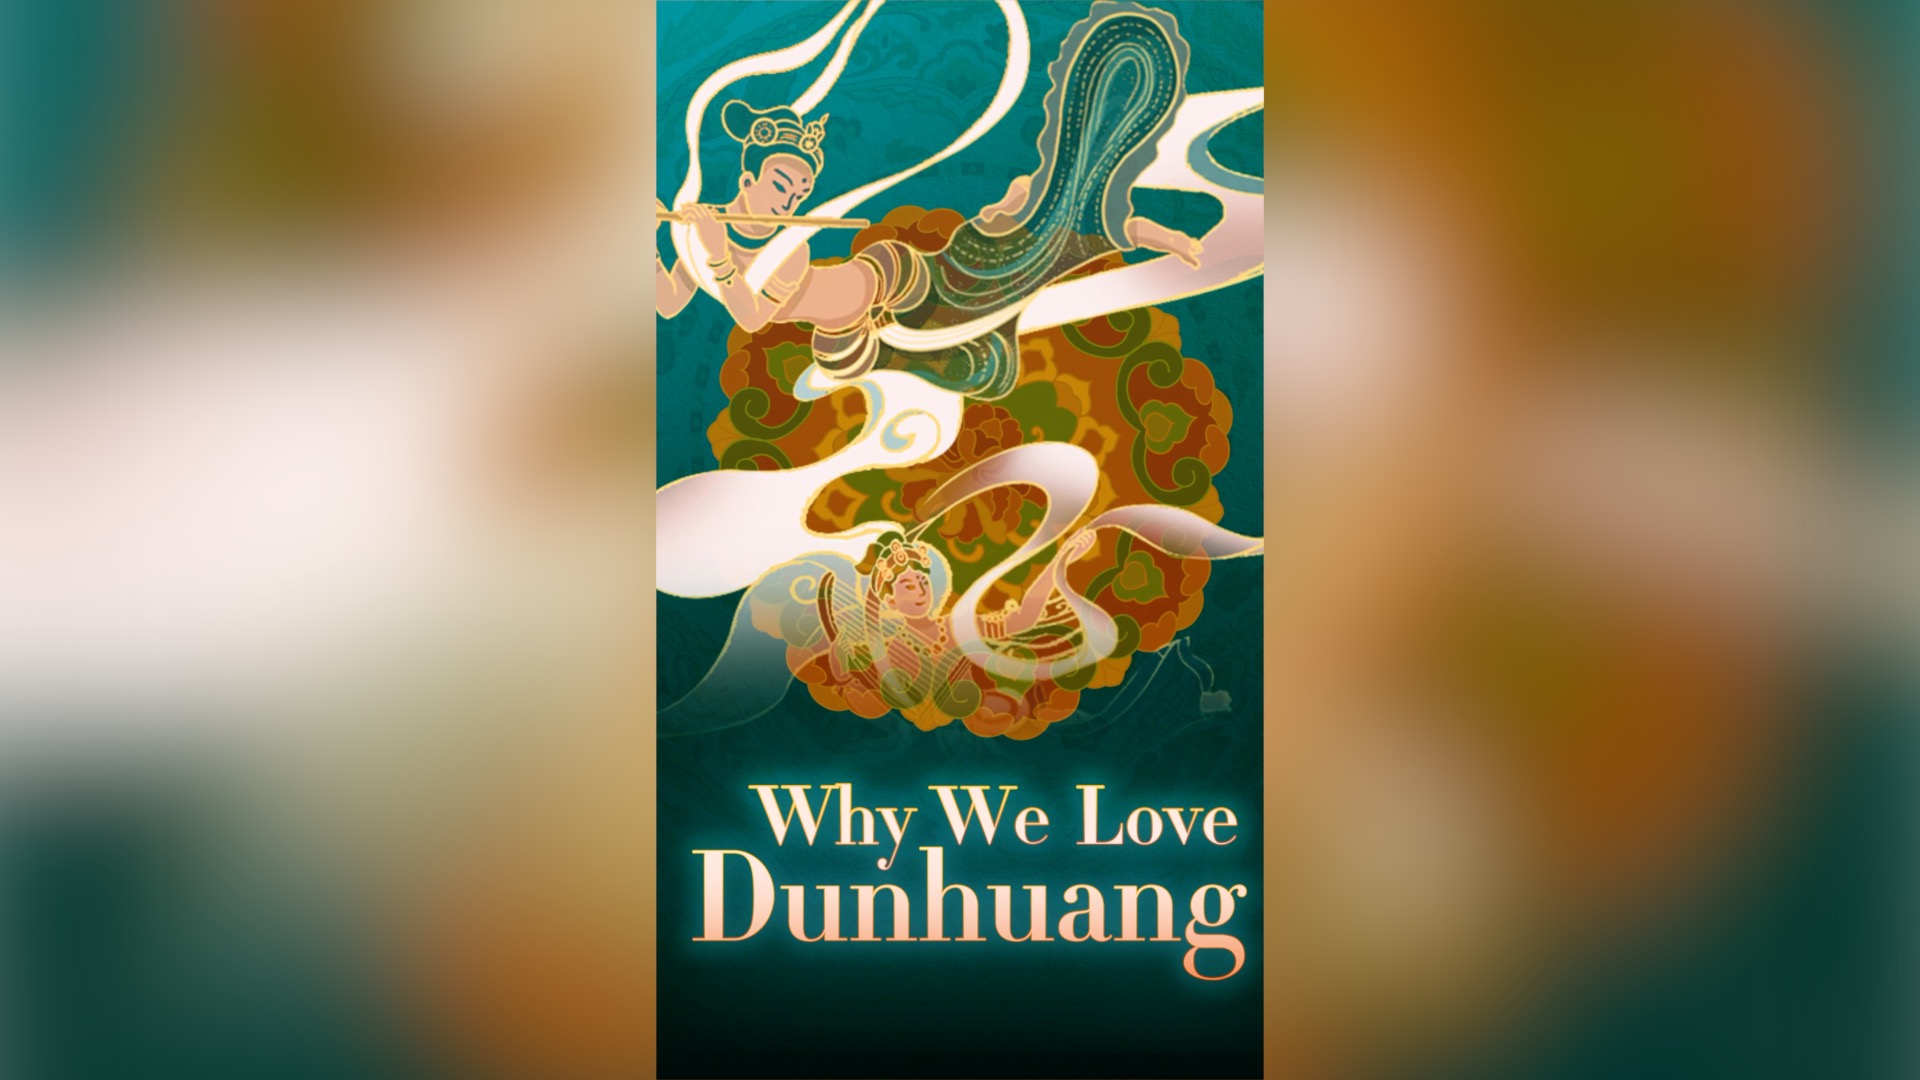 CGTN podcast trailer: Why We Love Dunhuang